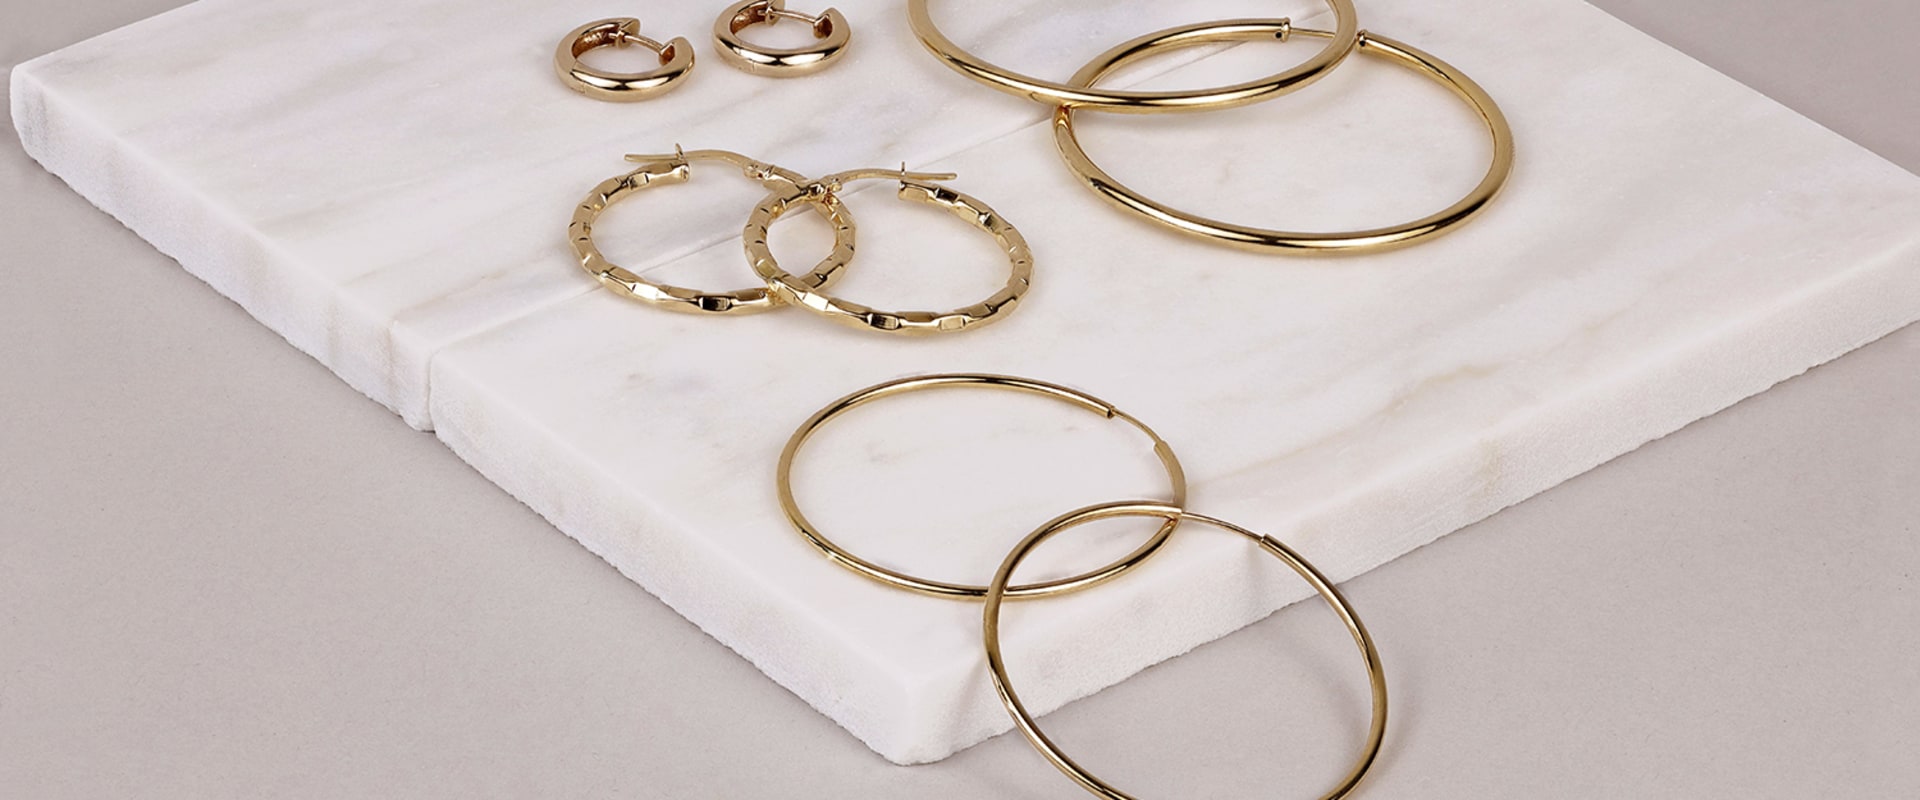 Everything You Need to Know About Hoop Earrings for Weddings